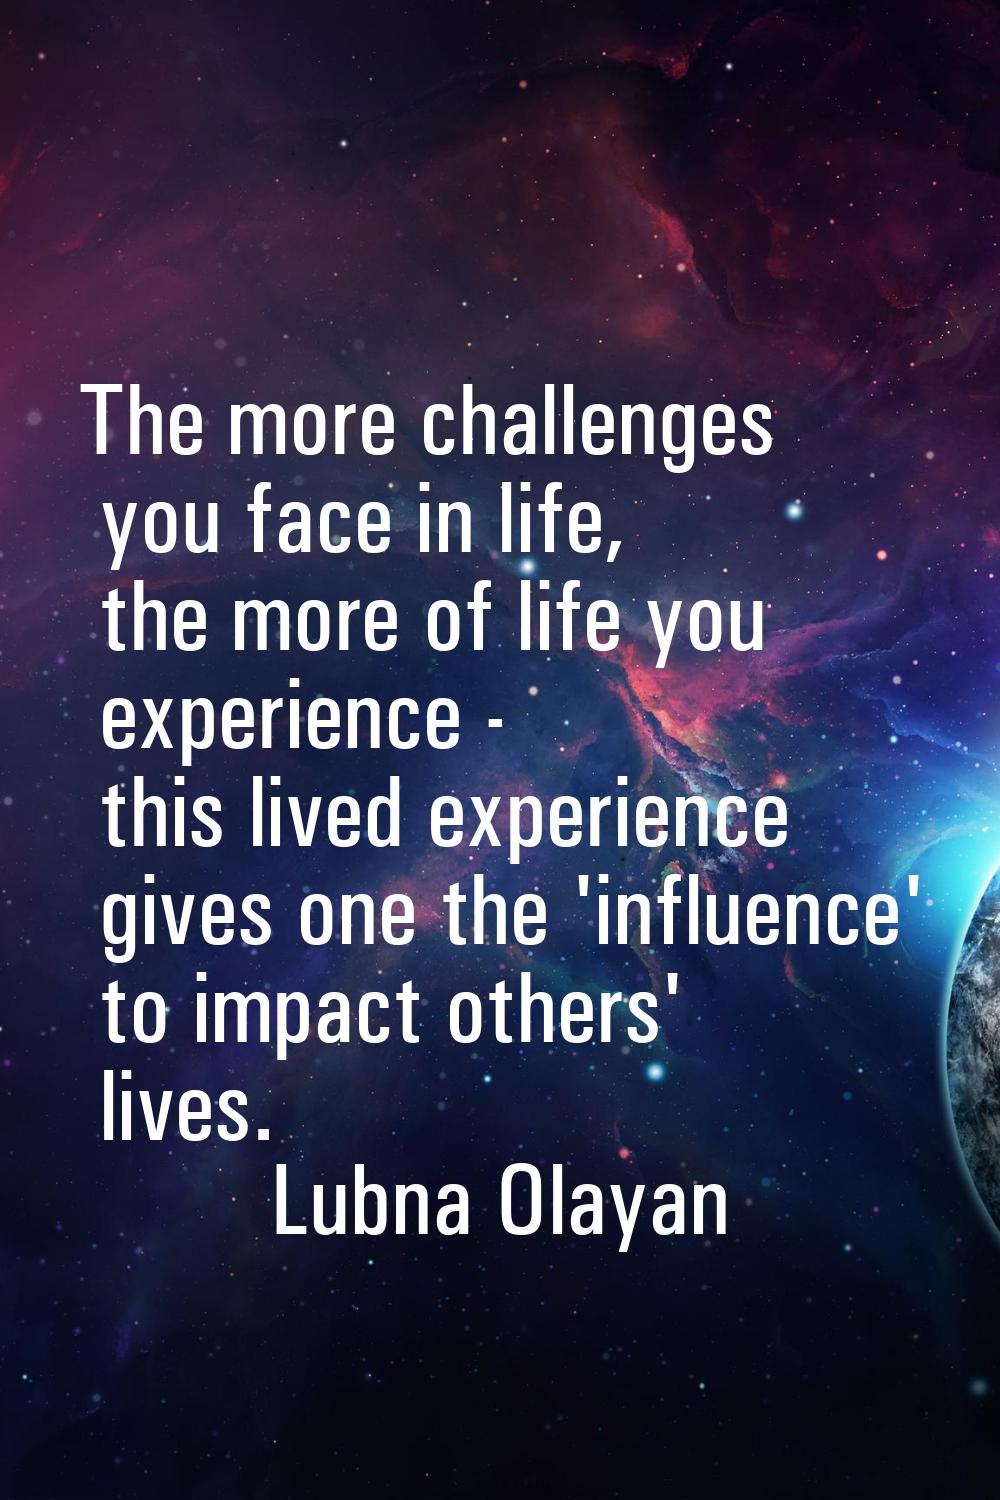 The more challenges you face in life, the more of life you experience - this lived experience gives